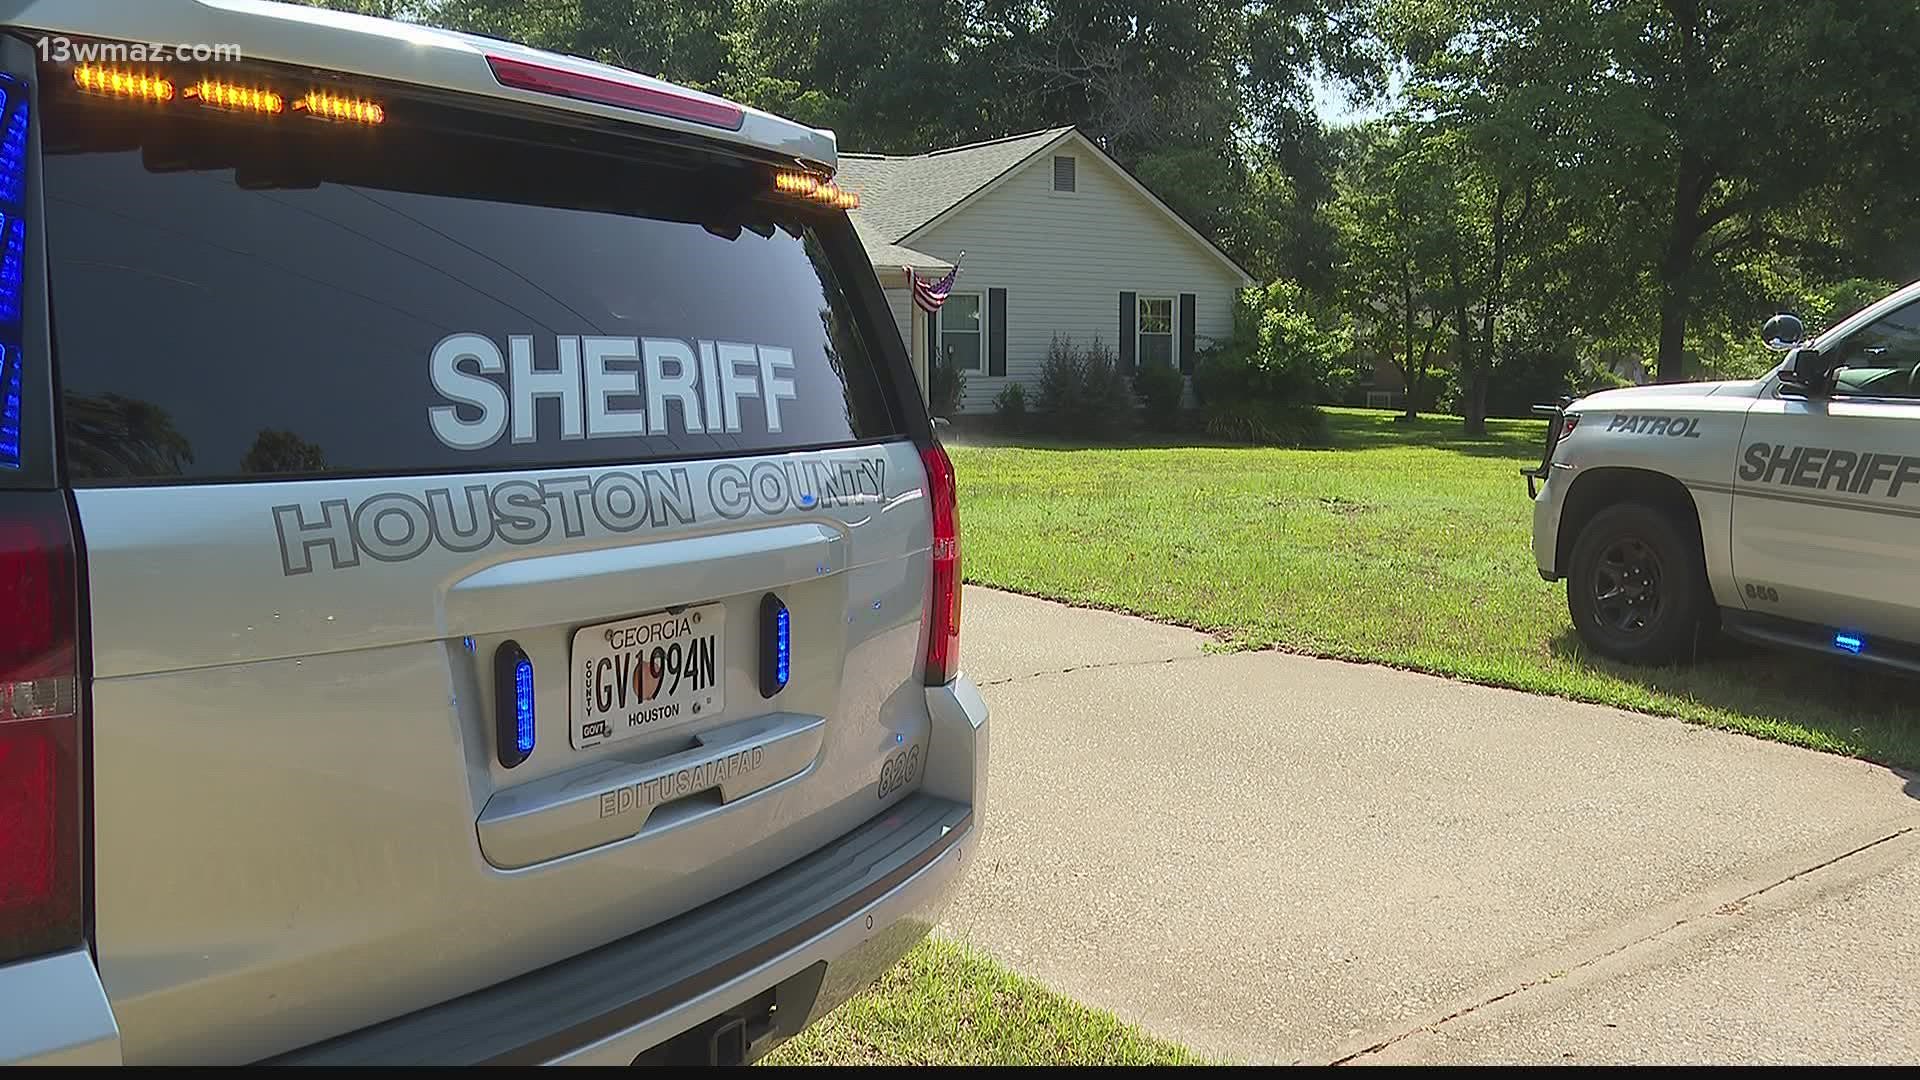 The investigation continues into what led up to Houston County deputies shooting an armed man outside his home Sunday night.